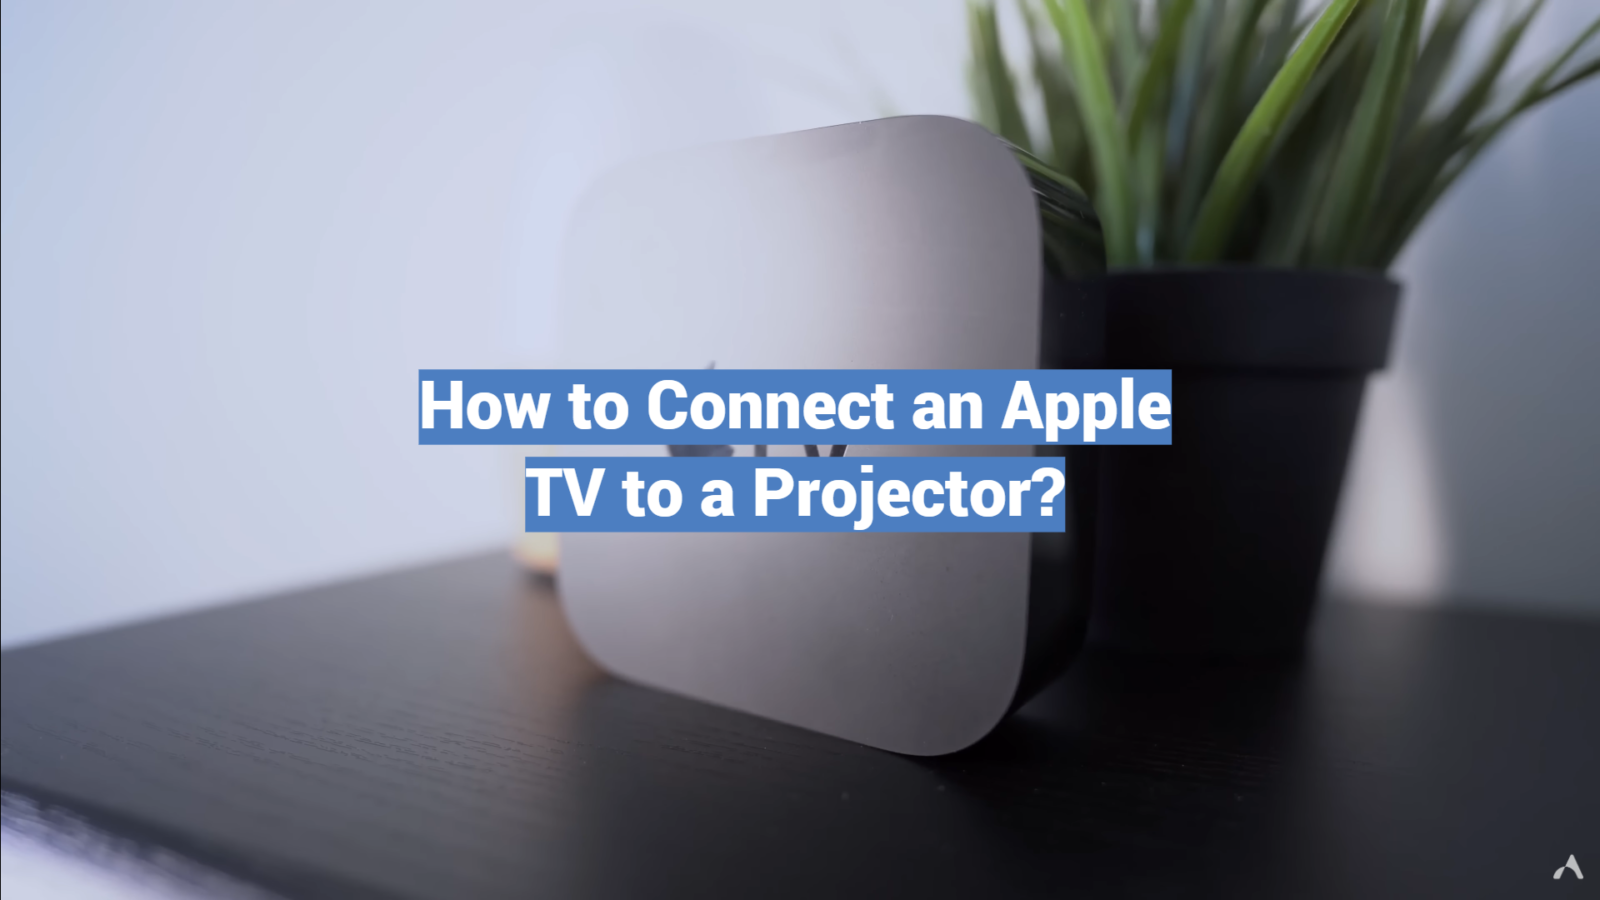 How to Connect an Apple TV to a Projector?